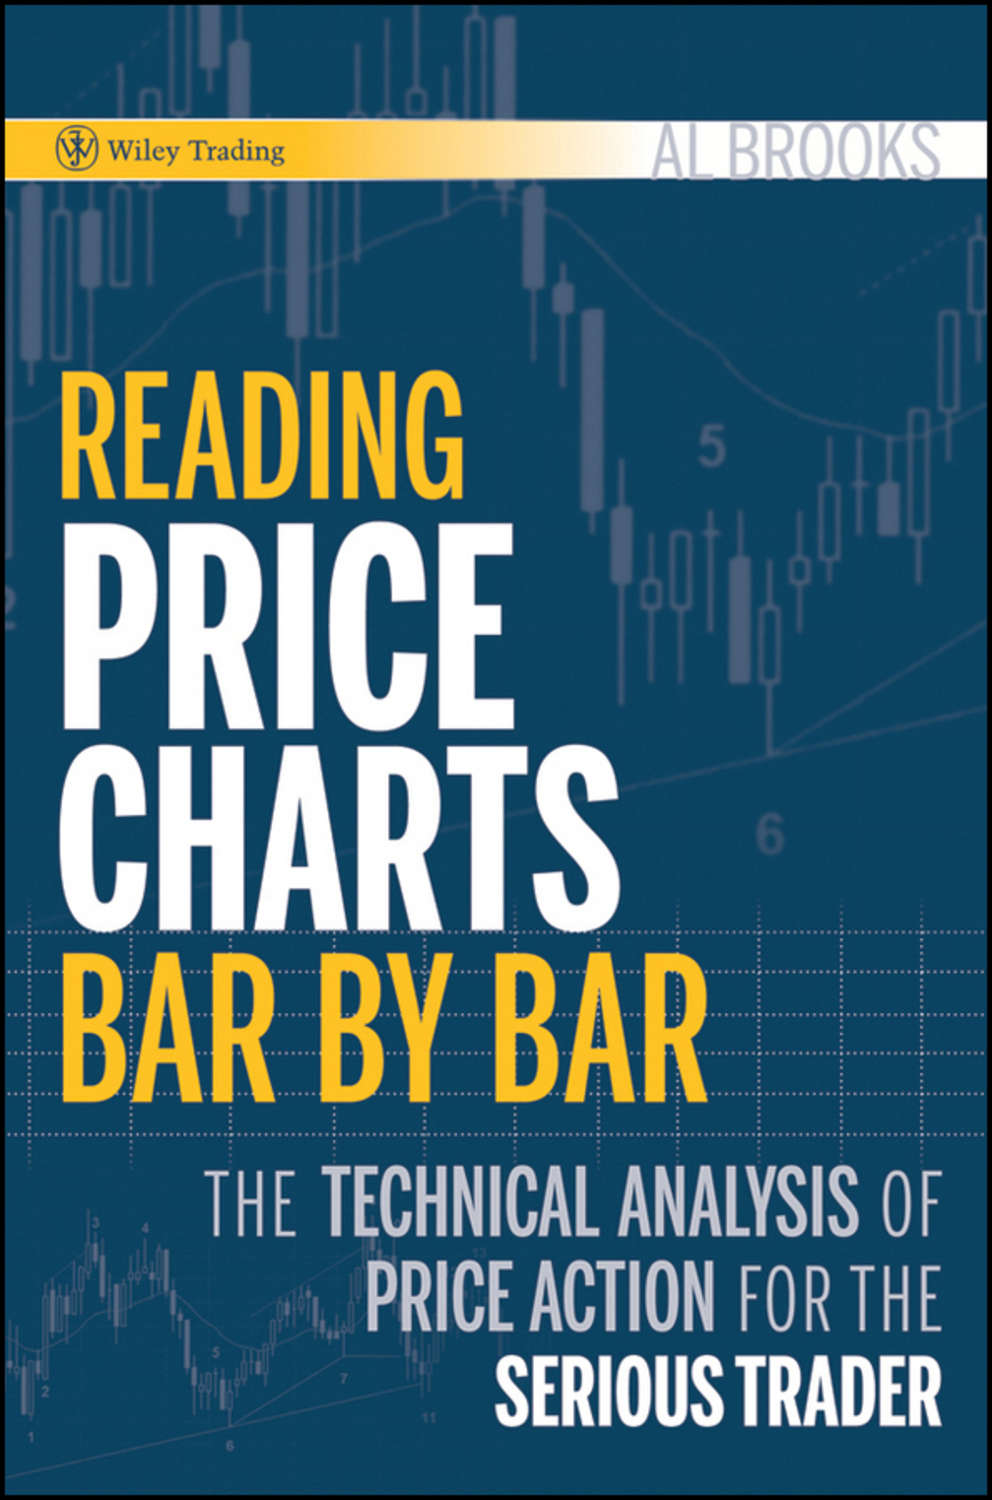 Al Brooks, Reading Price Charts Bar by Bar. The Technical Analysis of